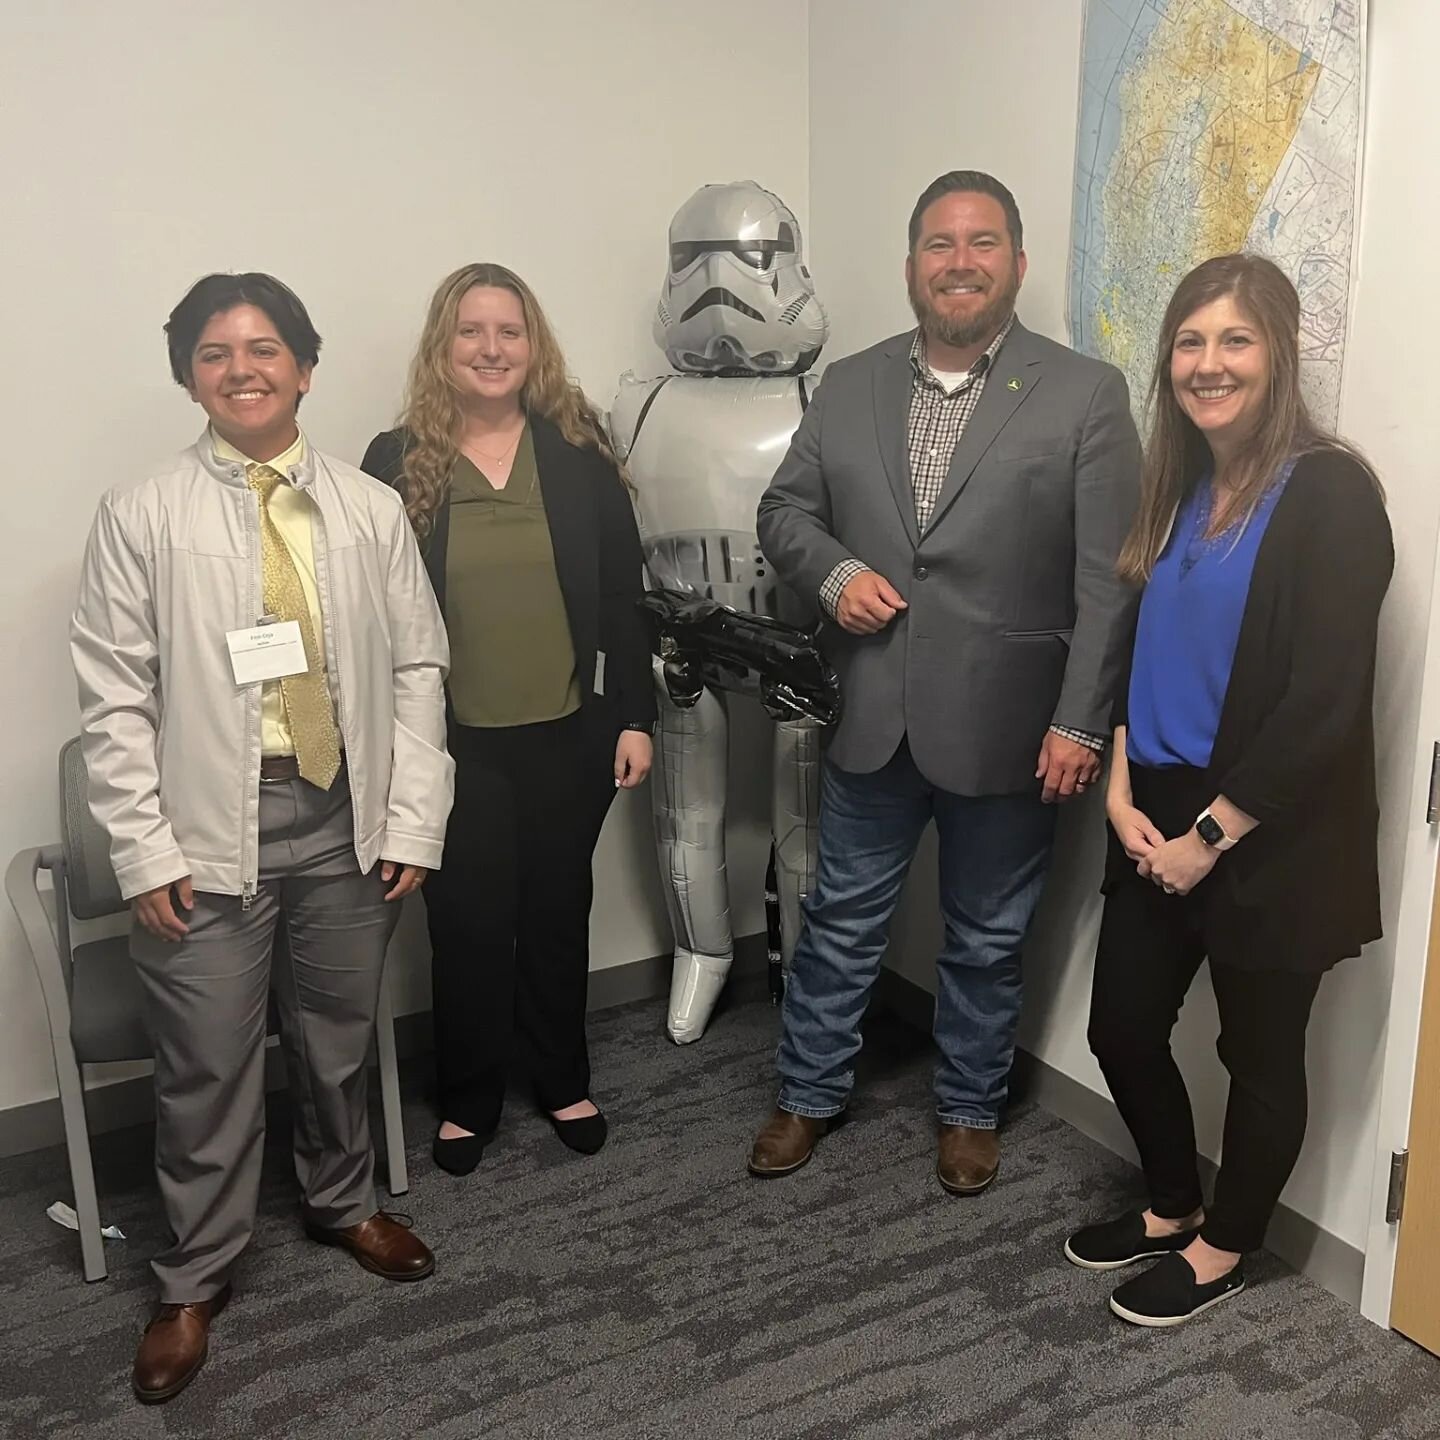 Thank you @juanalanisca for spending your time today learning how we can work together to save Californians from the leading cause of preventable death. #bigbadtobacco will not win. #voicesagainsttobacco